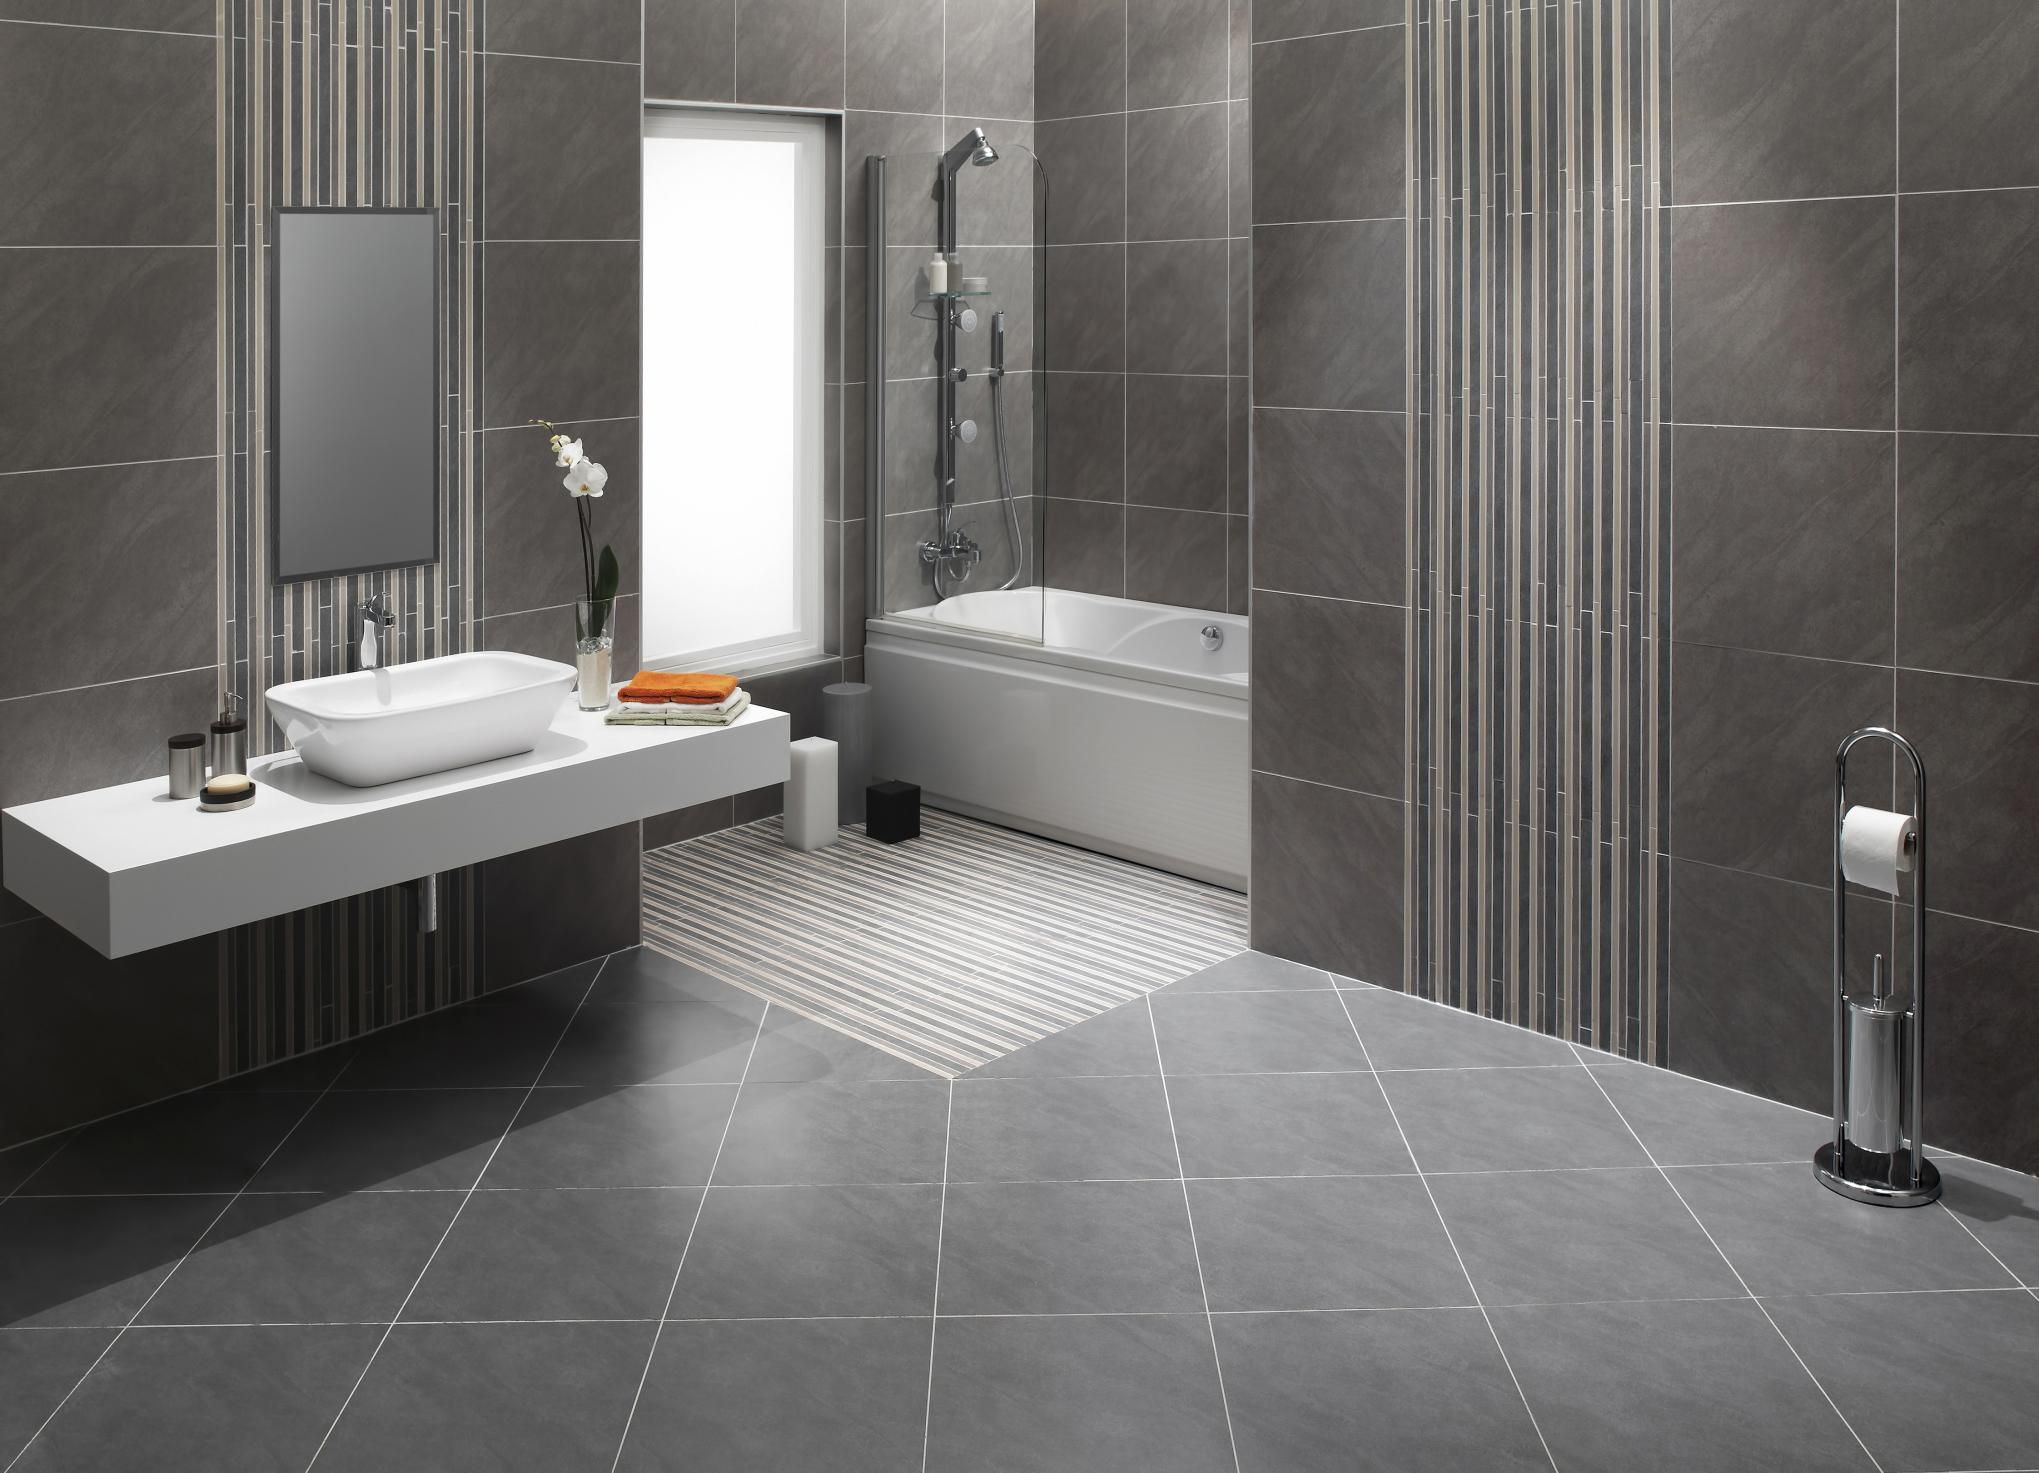 Best Tile For Bathroom
 Pros and Cons of Natural Stone Tile for Bathrooms